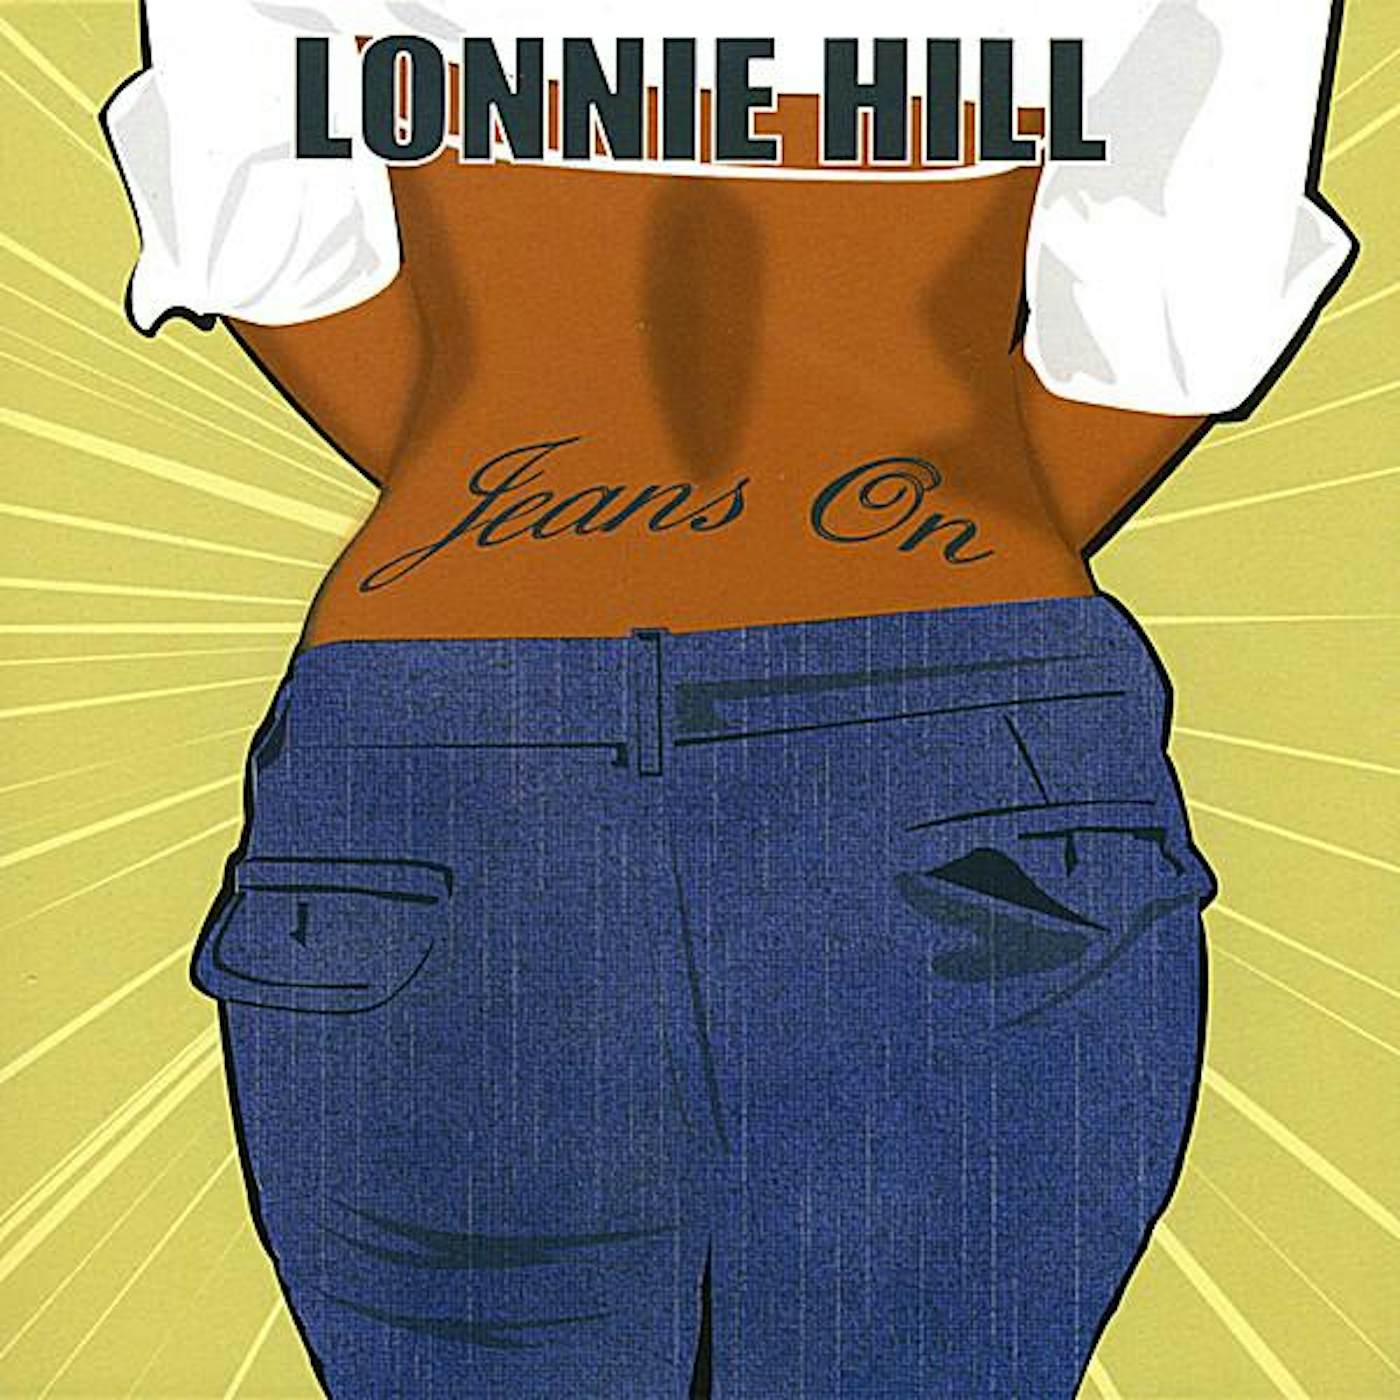 Lonnie Hill JEANS ON CD